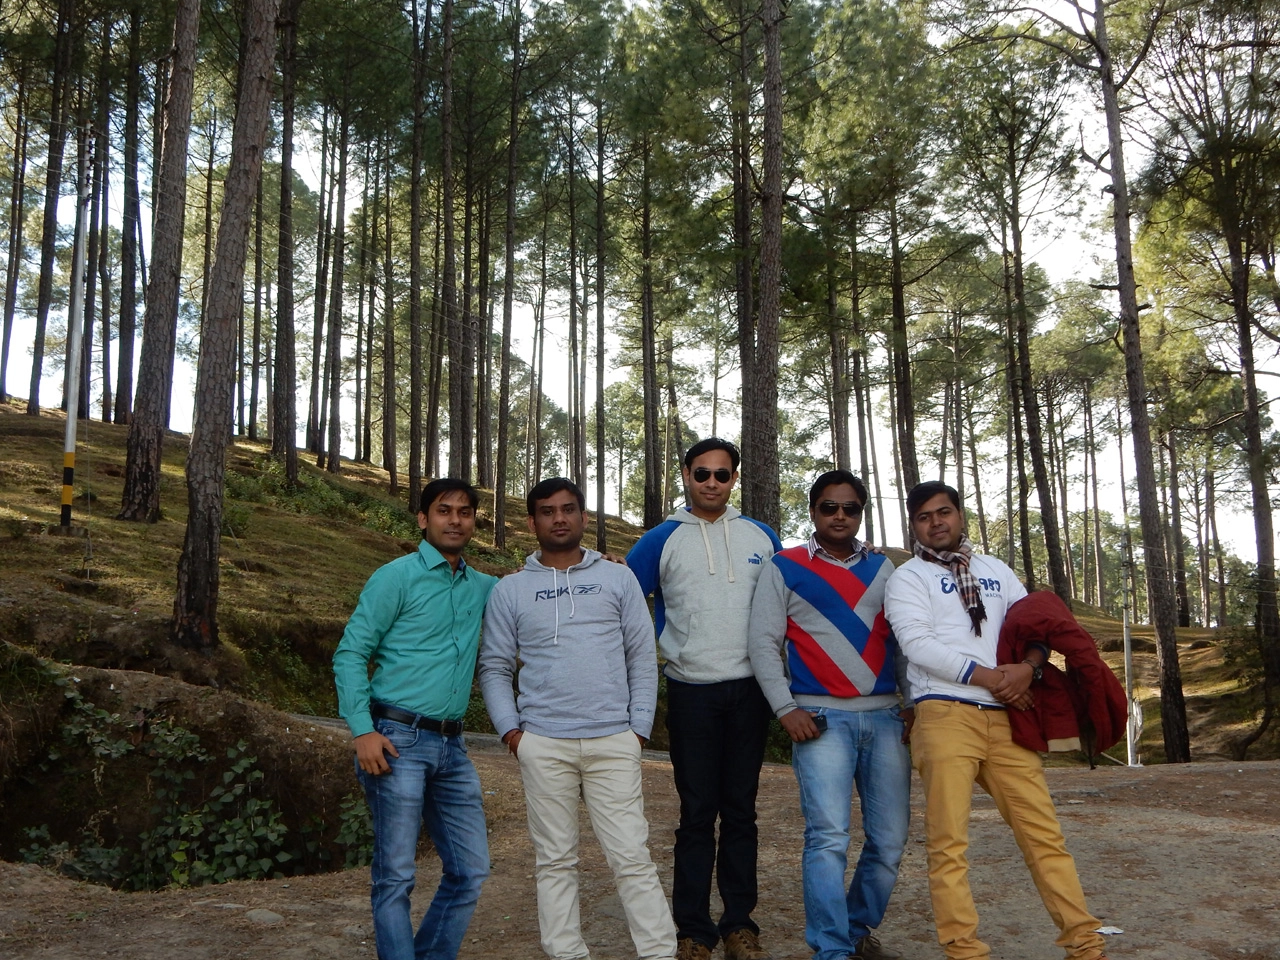 On the way to Ranikhet